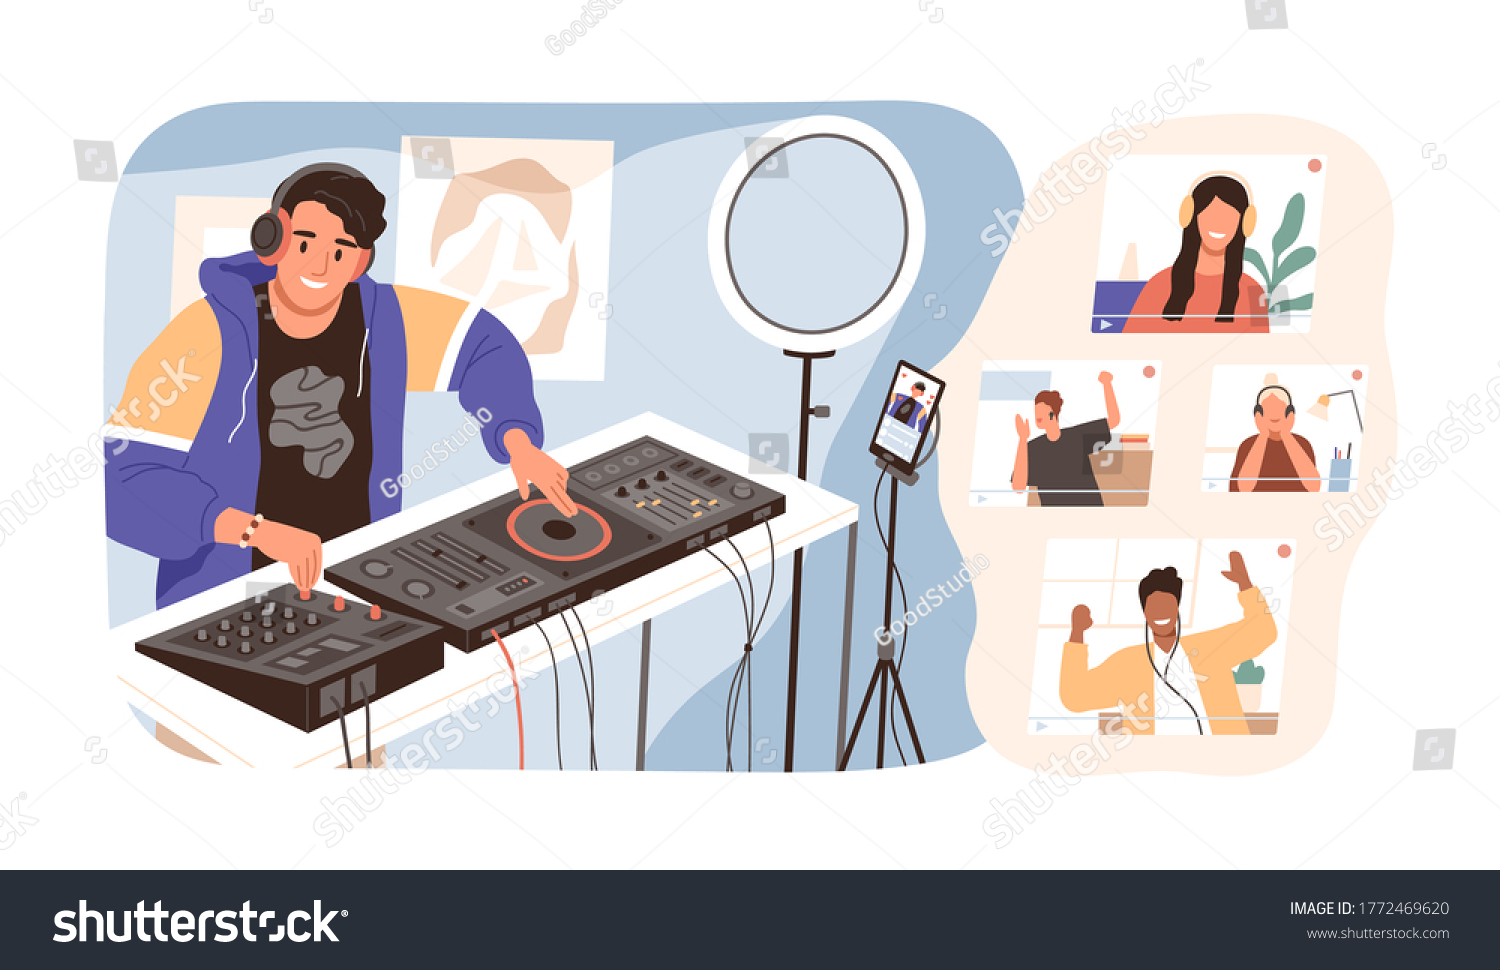 SVG of Modern guy online dj mixing music at live stream vector illustration. Smiling man in headphones have virtual party with diverse people isolated. Joyful male create sound entertainment for audience svg